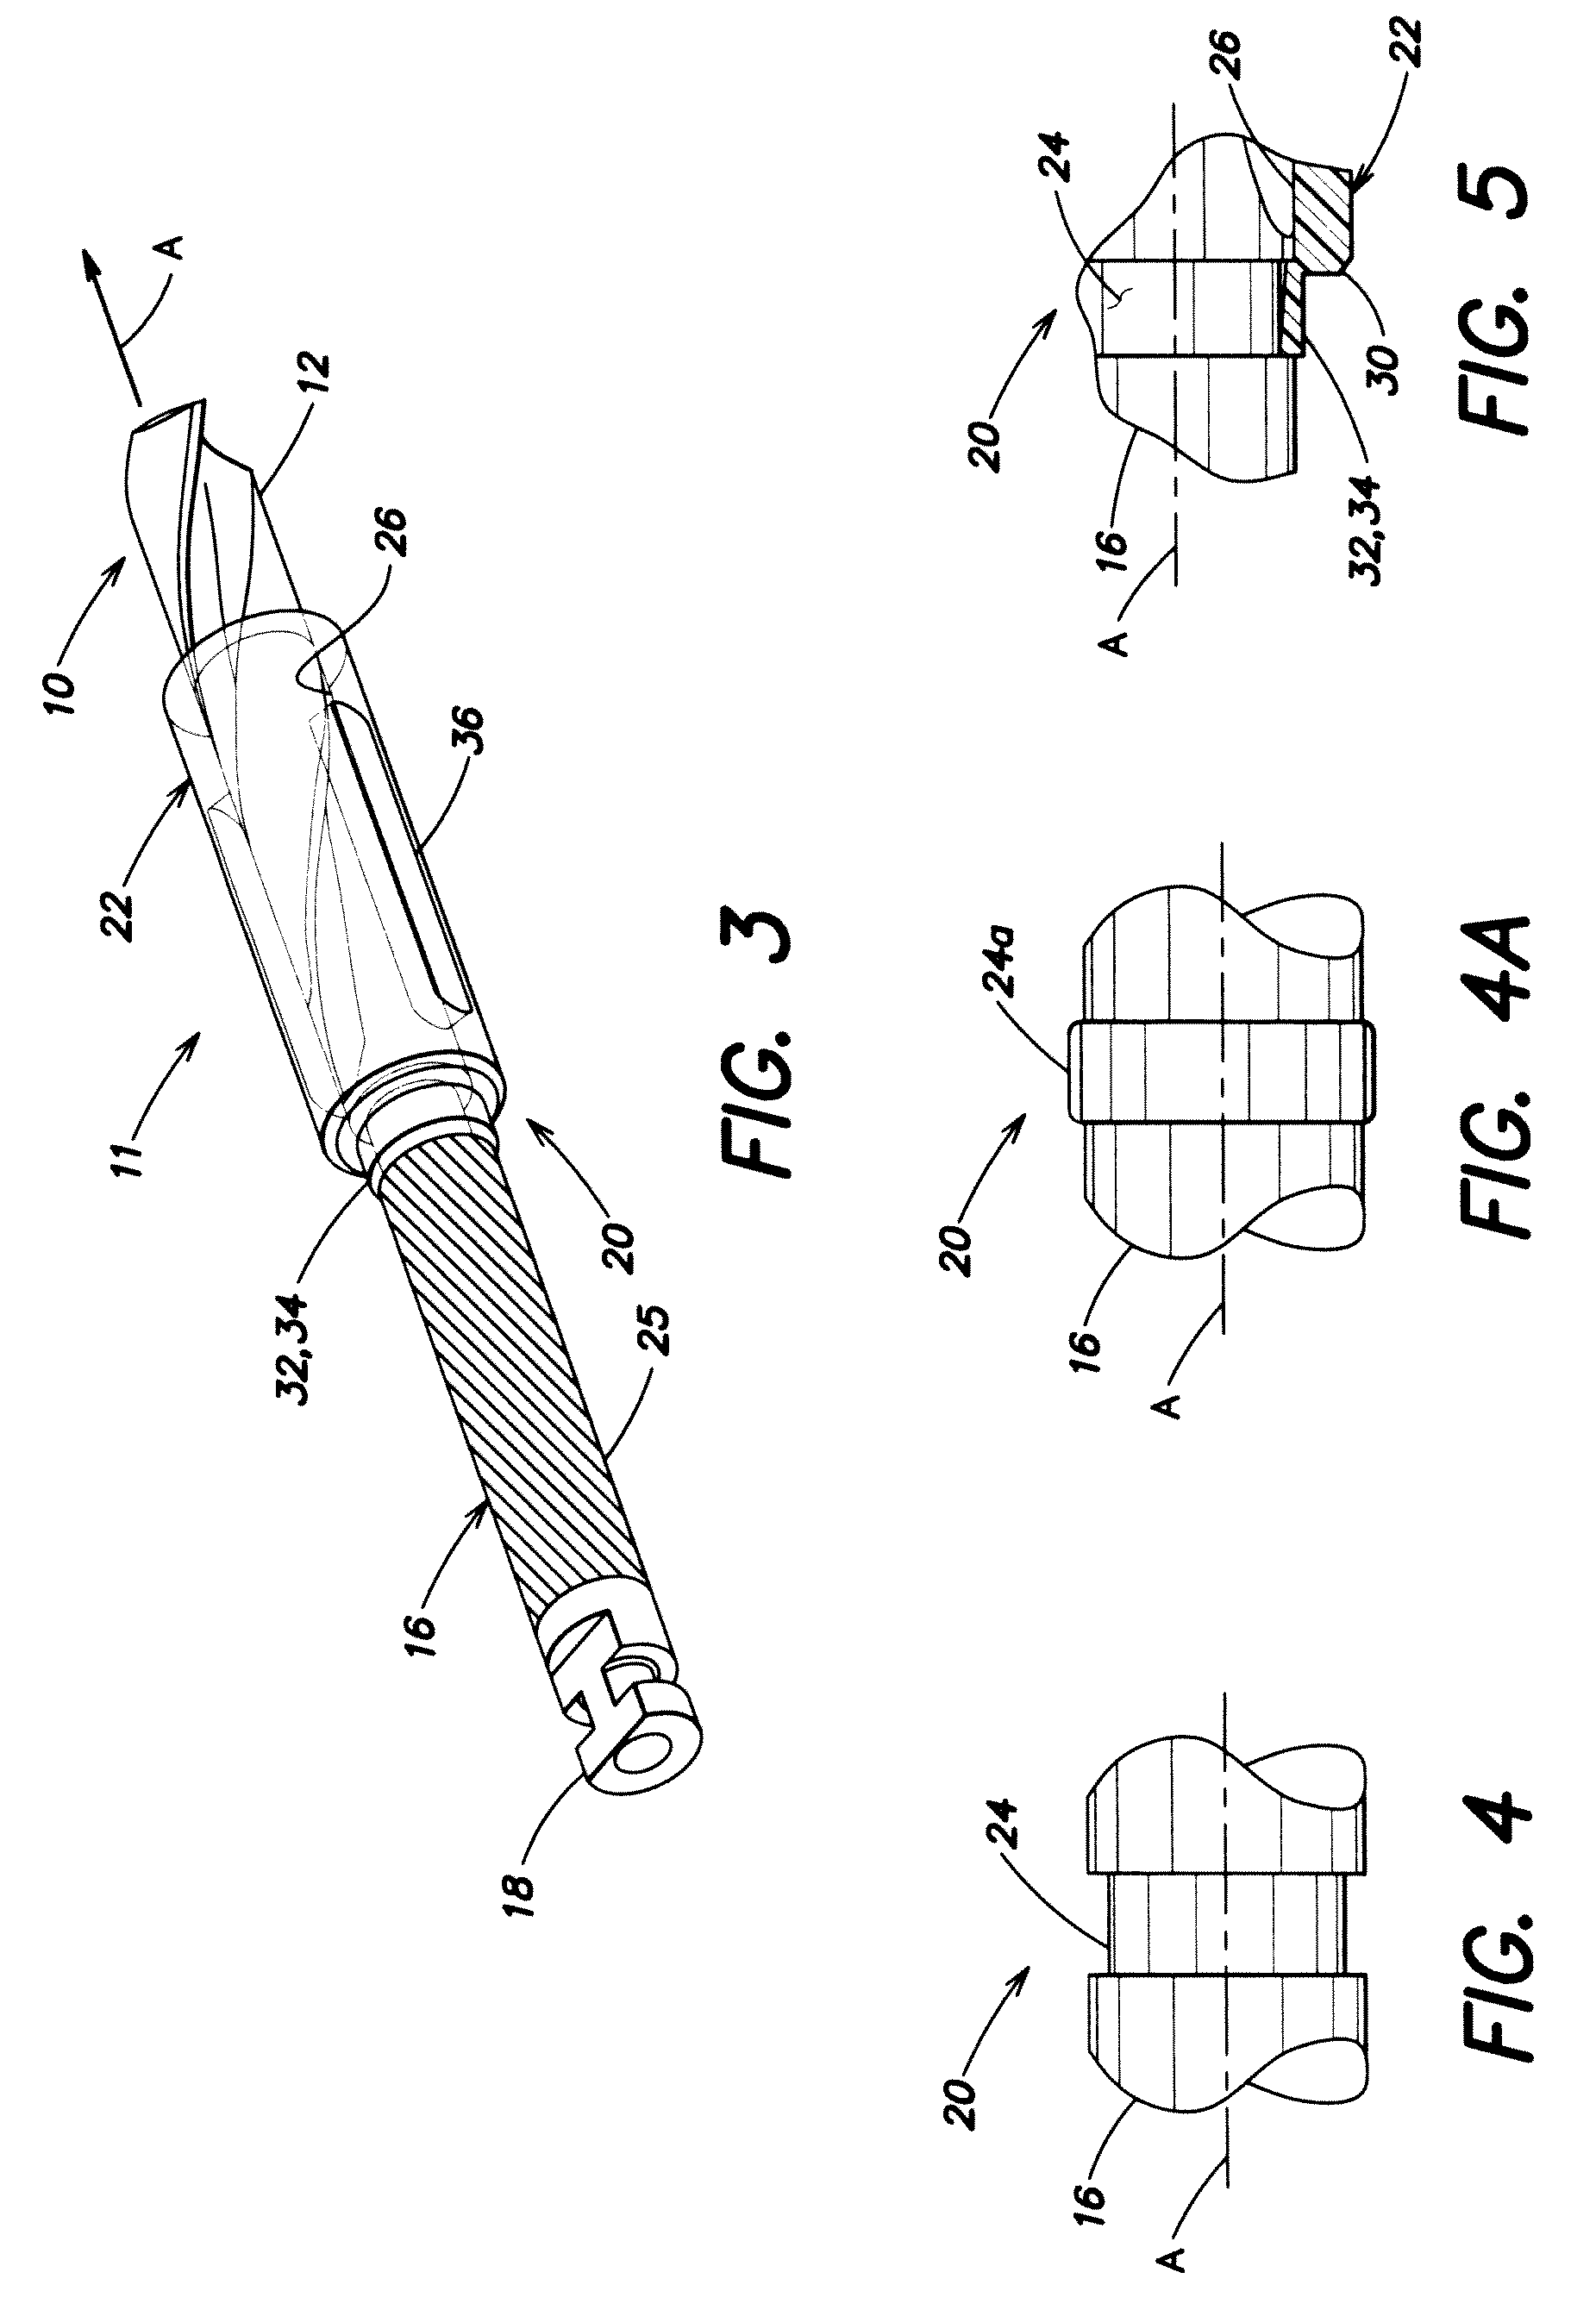 Drill stop sleeve for a dental drill, dental drill device with a drill stop sleeve, and set containing several drill stop sleeves